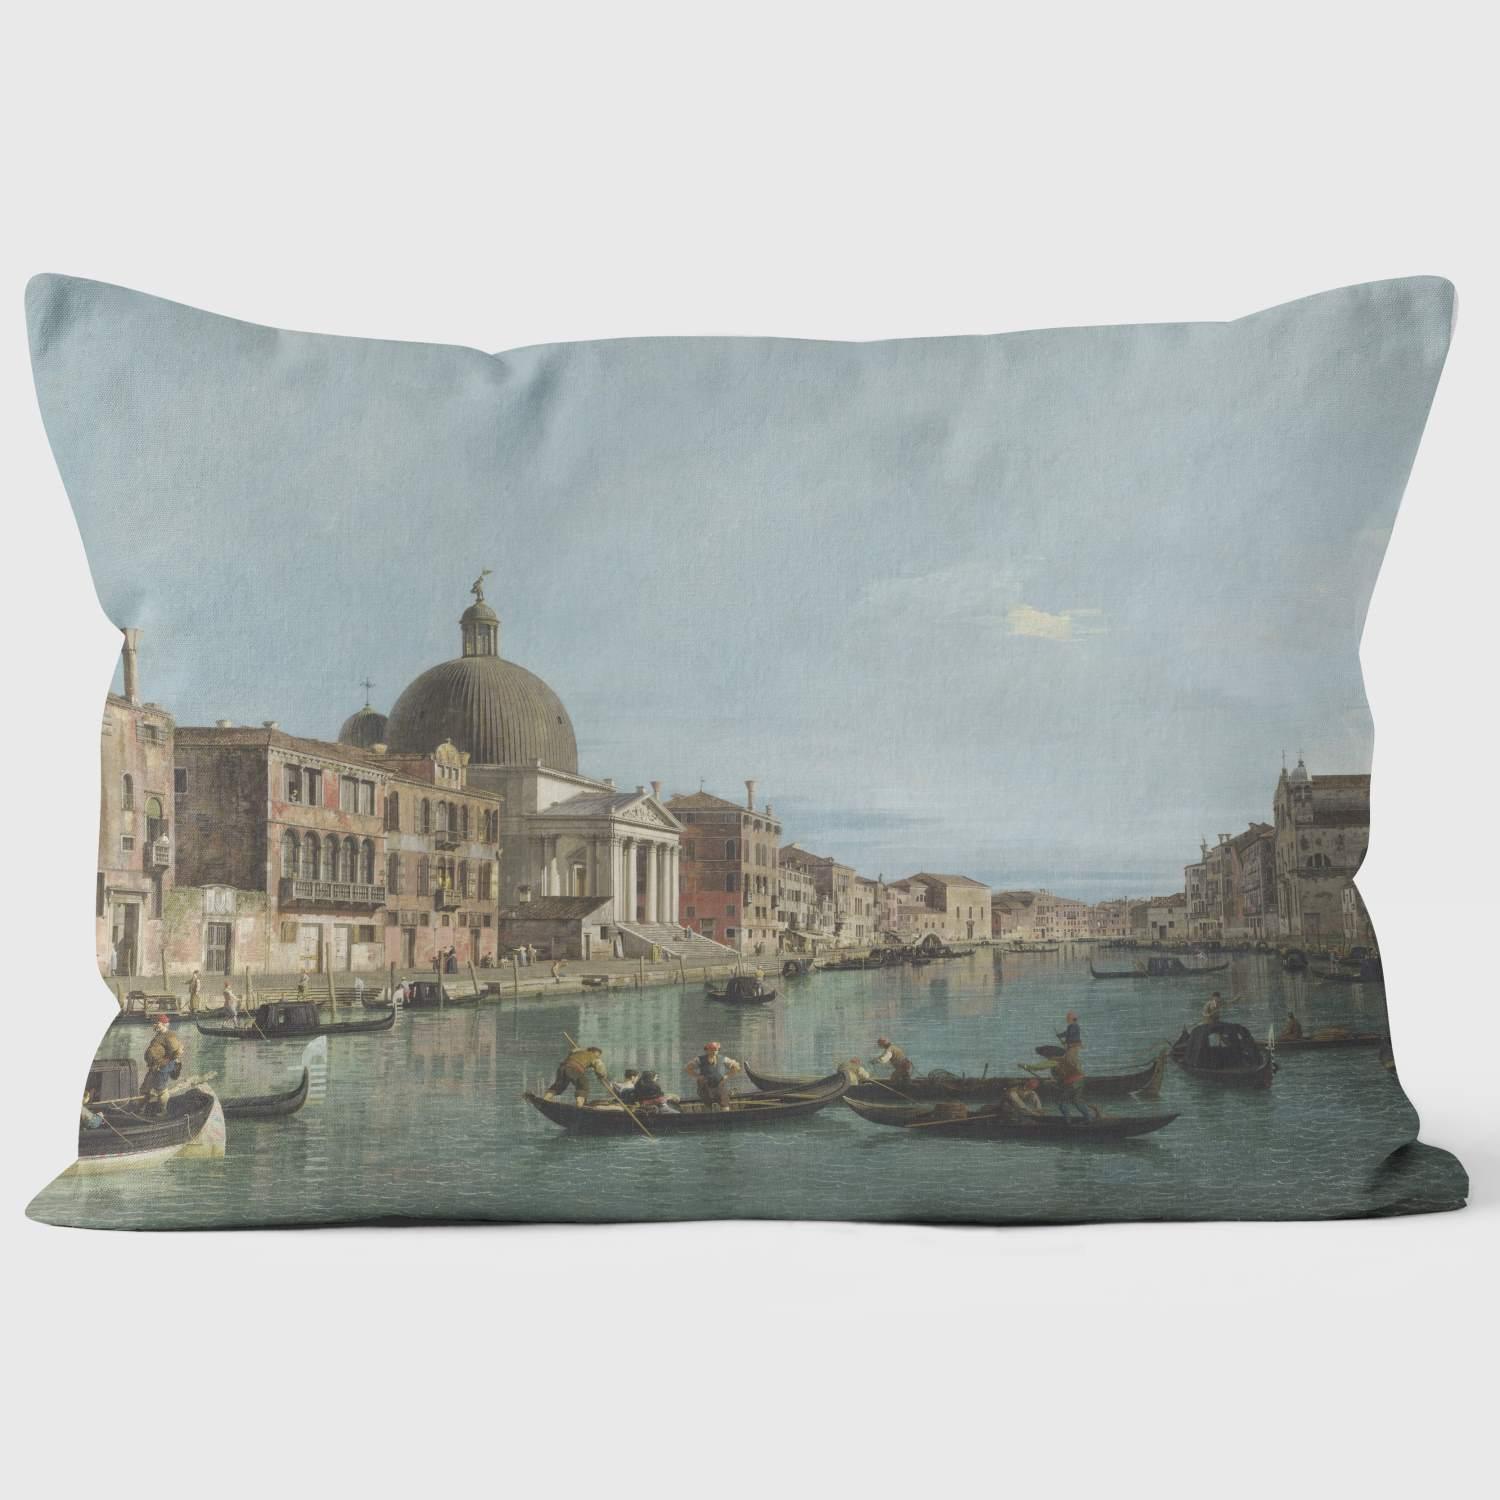 The Grand Canal Venice - Canaletto's - National Gallery Cushion - Handmade Cushions UK - WeLoveCushions